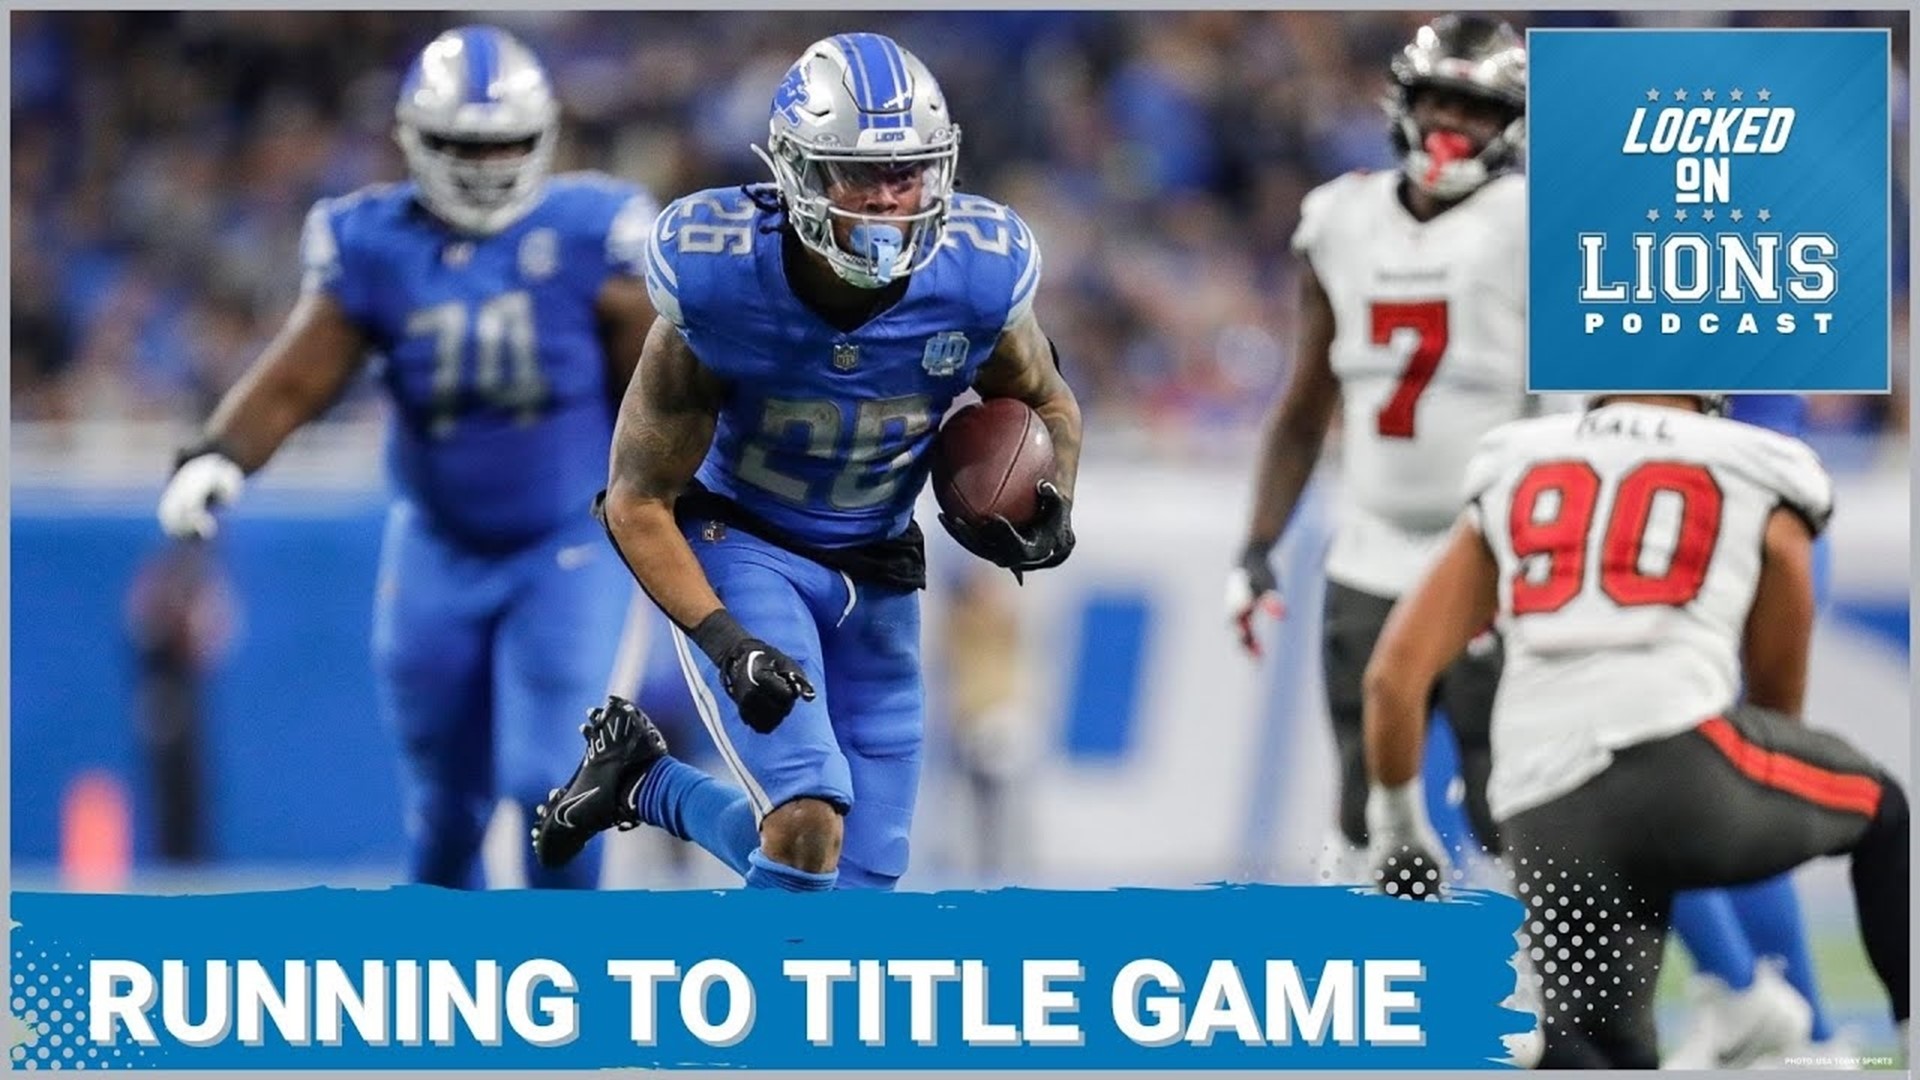 The Detroit Lions have won back to back playoff games after knocking off Tampa Bay 31-23.